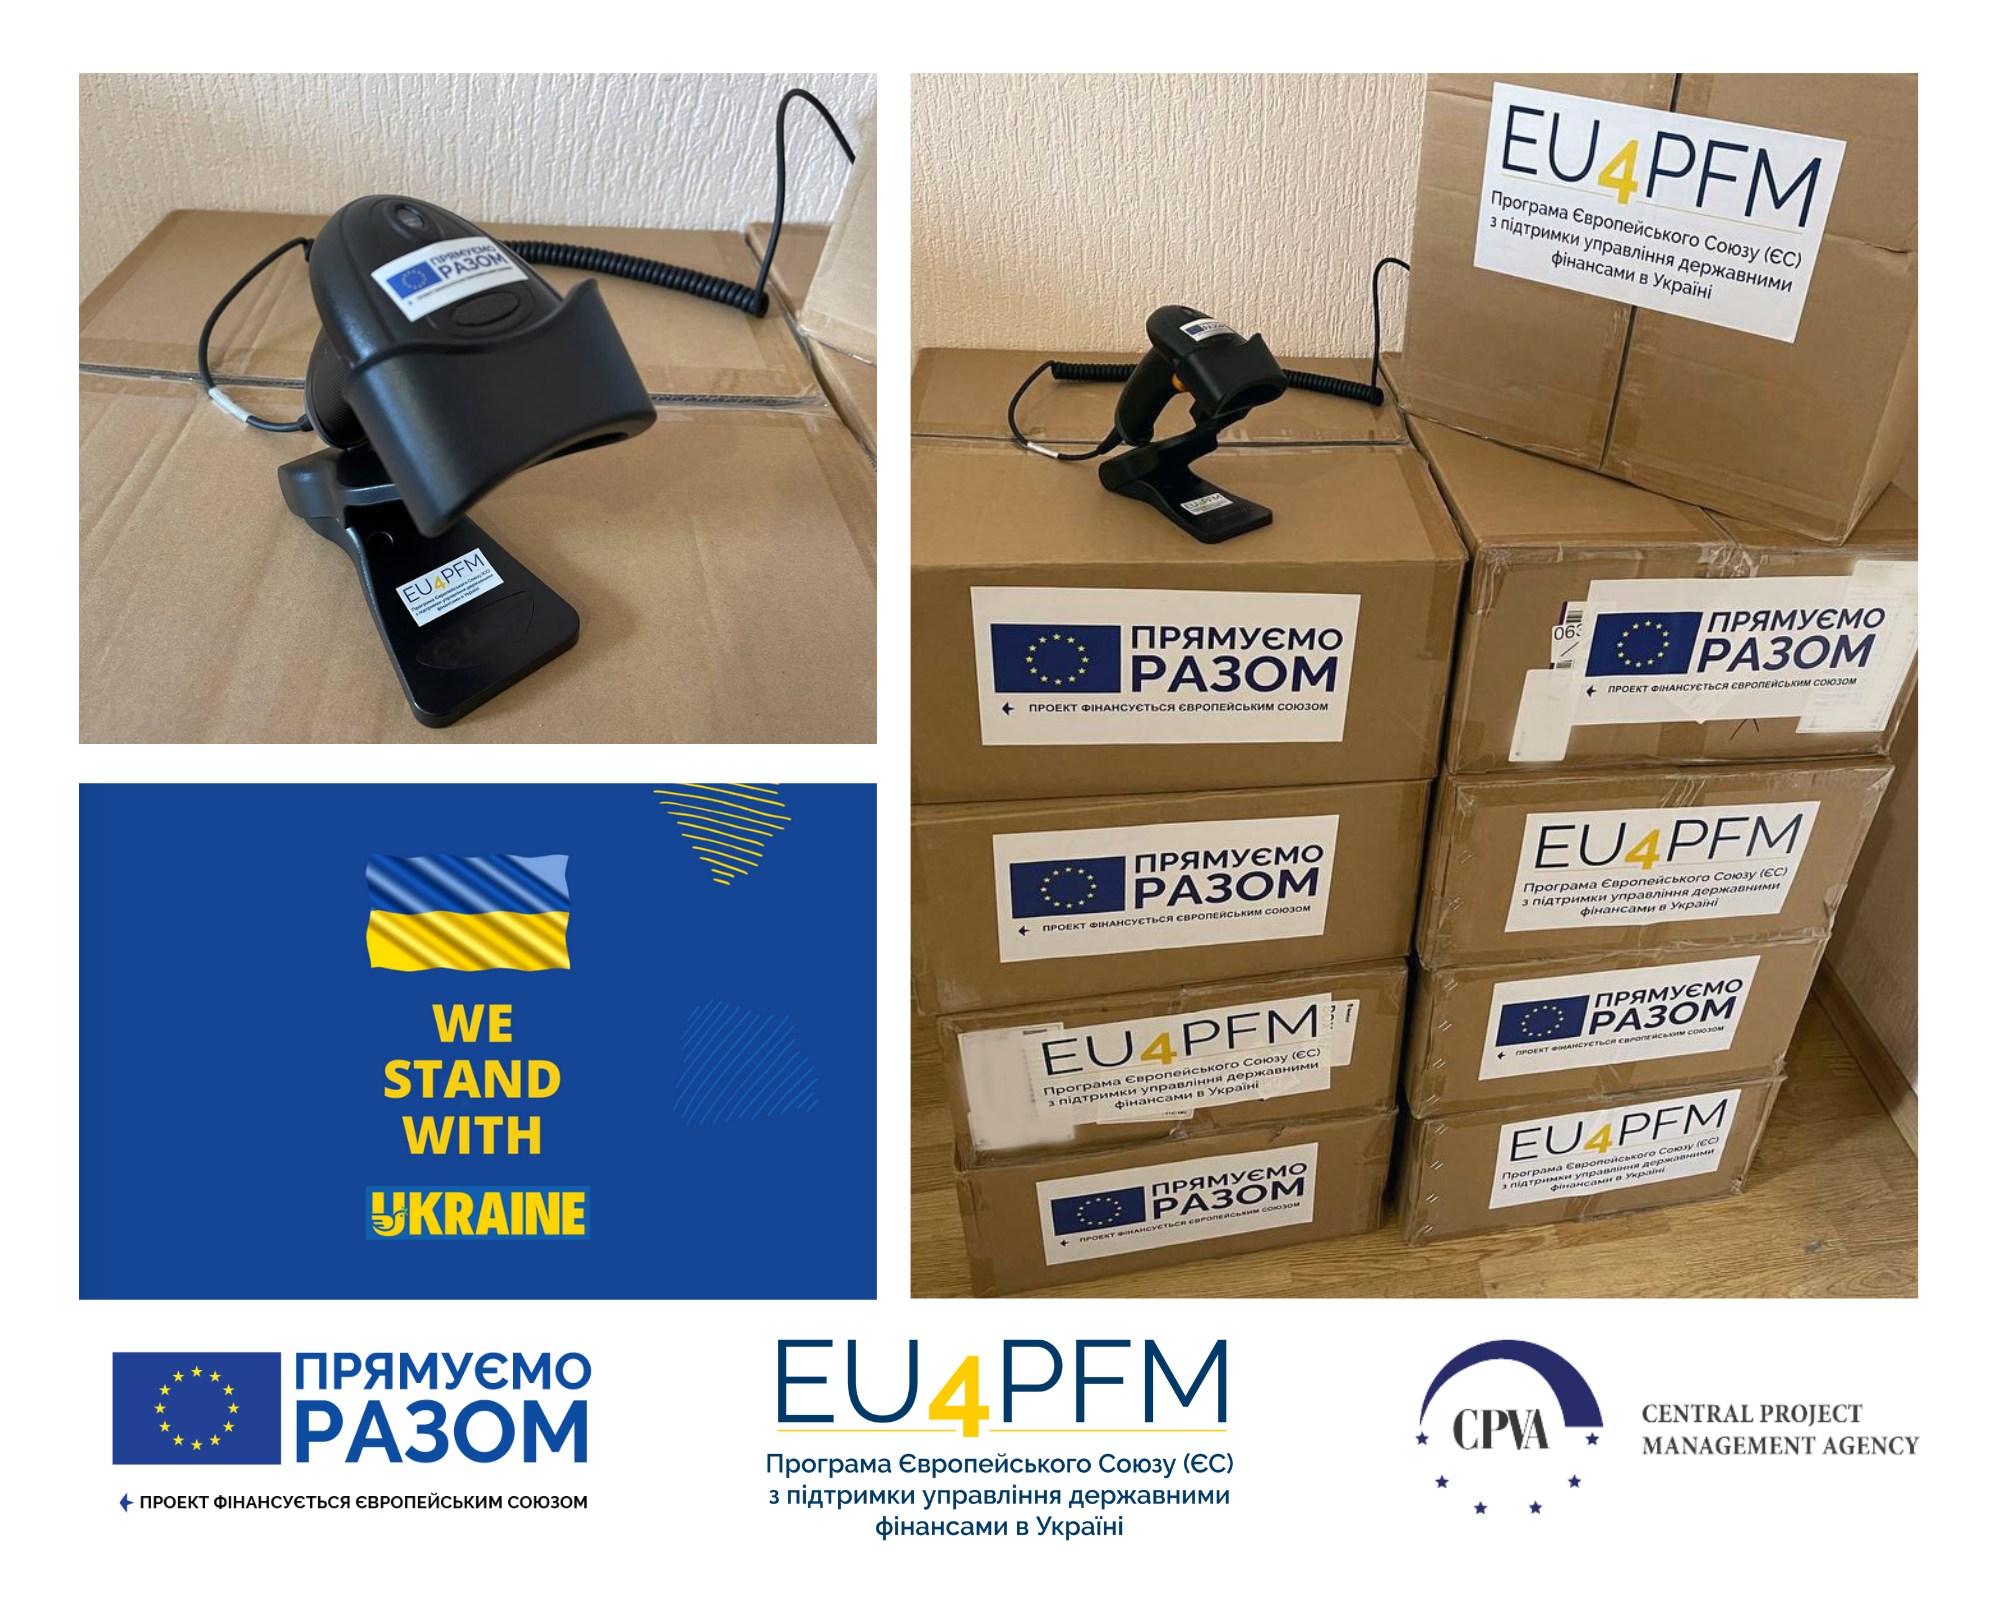 The State Customs Service received the equipment necessary for the start of the “customs visa-free” operation